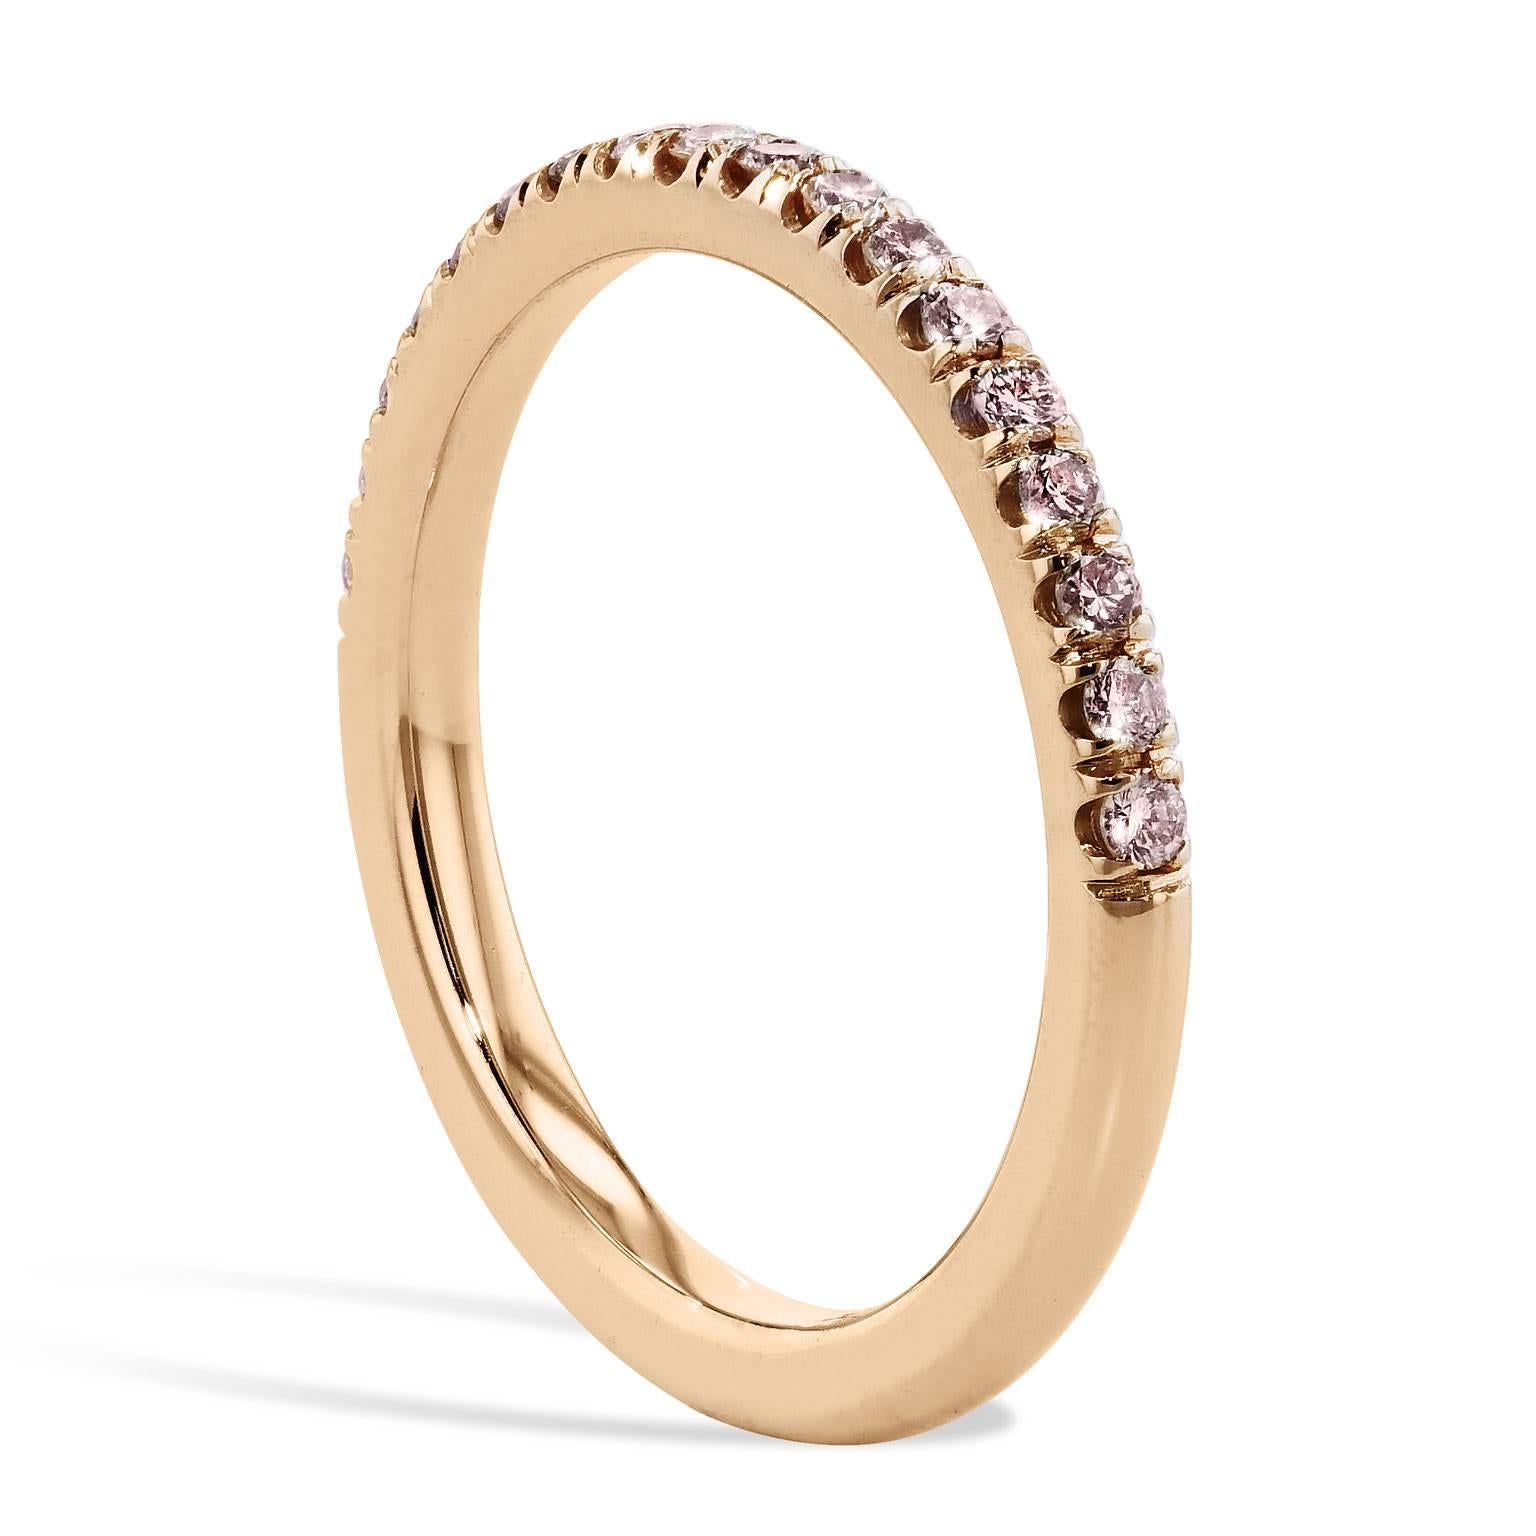 This diamond band ring features natural light pink diamonds pave set with a total weight of 0.26 carat (VS2/SI1). Affixed to a 14 karat rose gold band, the split V detail, opens the eye, and allows the ring to pop with light (Size 6.5).